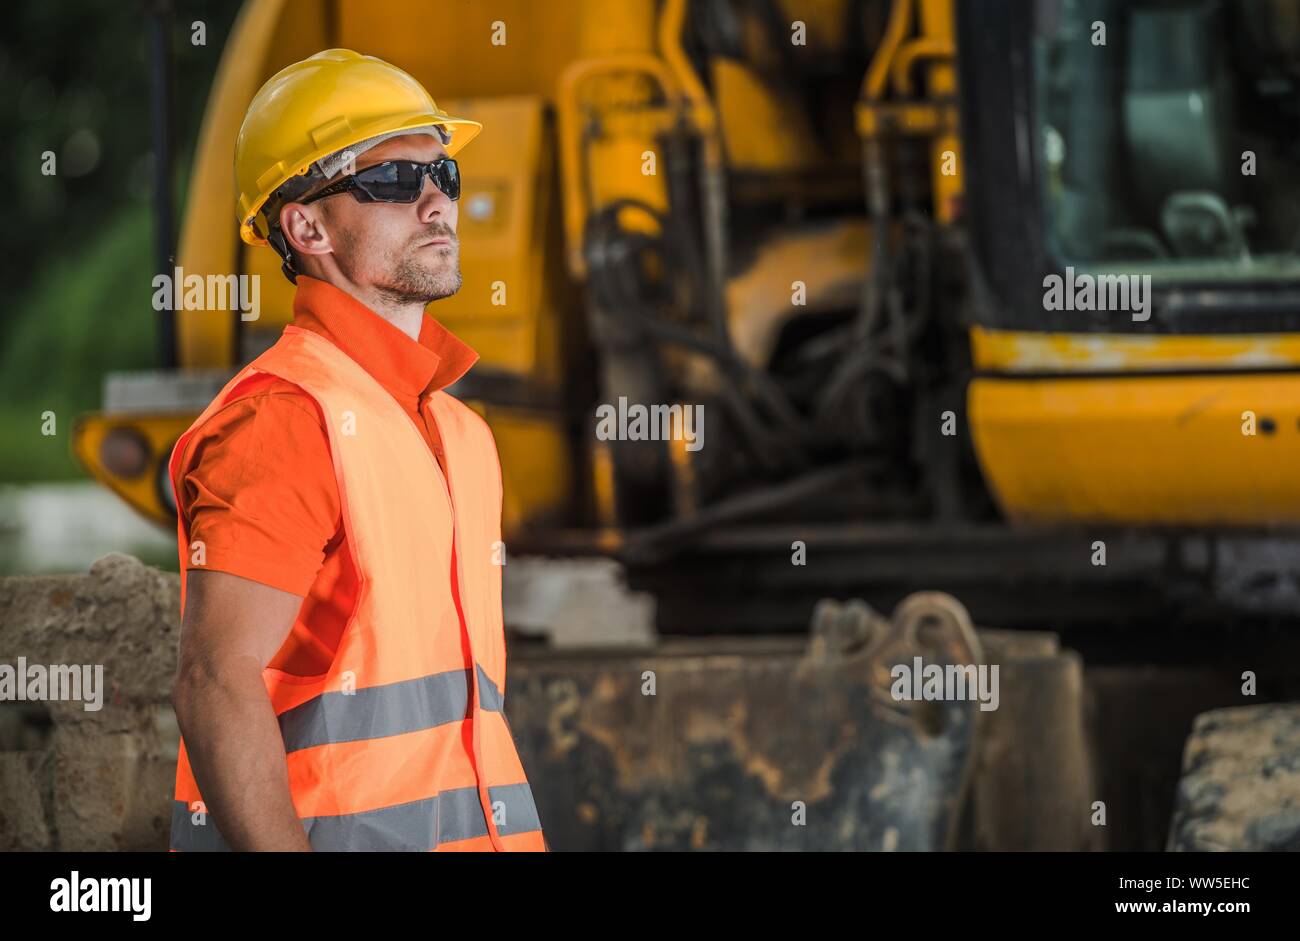 https://c8.alamy.com/comp/WW5EHC/construction-worker-on-duty-caucasian-men-in-his-30s-wearing-safety-accessories-building-machinery-in-a-background-industrial-zone-WW5EHC.jpg